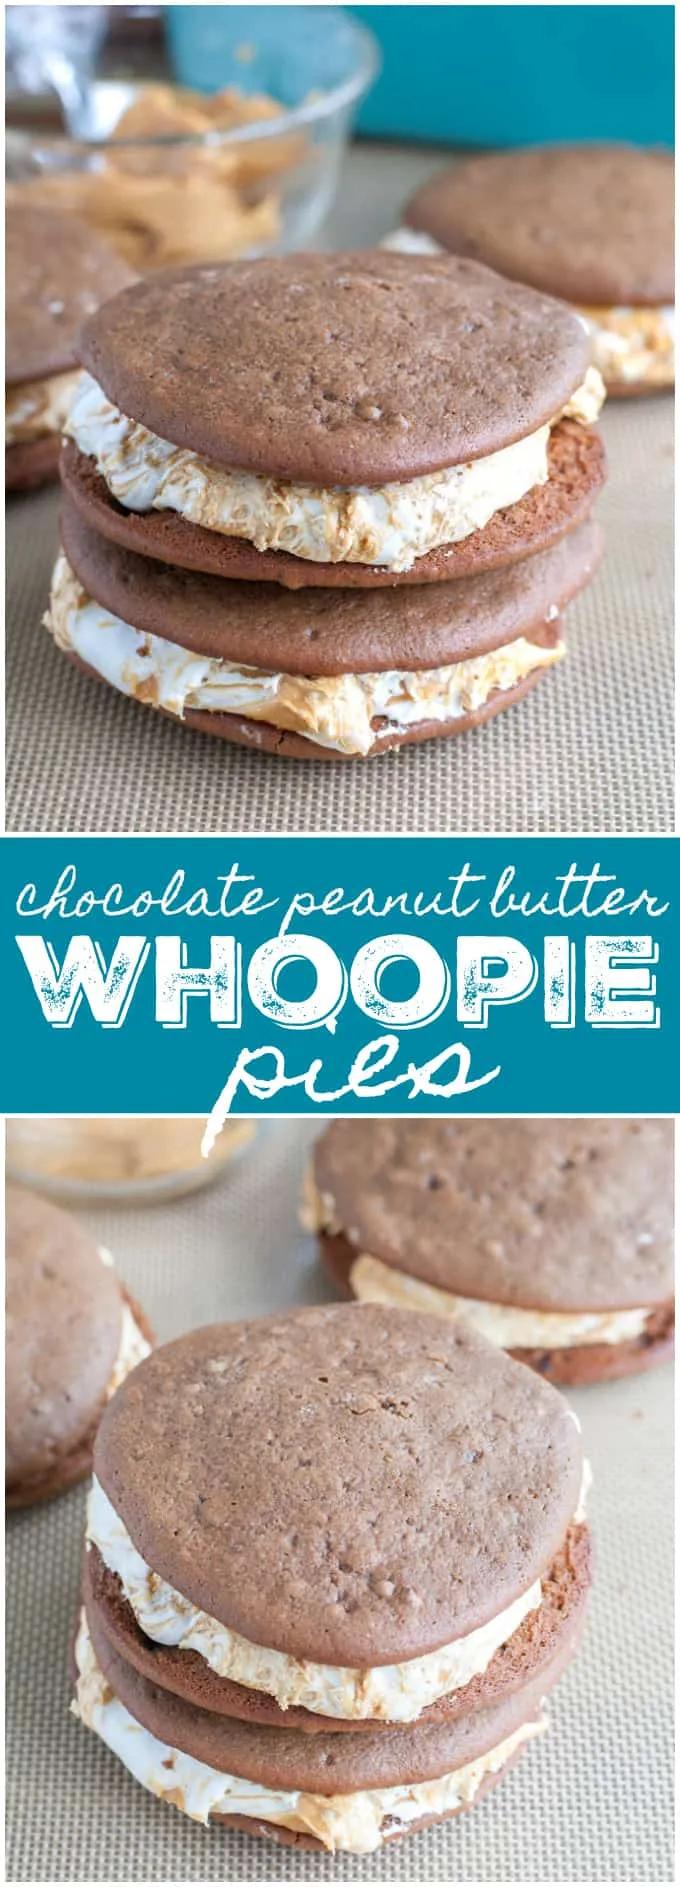 Chocolate Peanut Butter Whoopie Pies - Simply Stacie